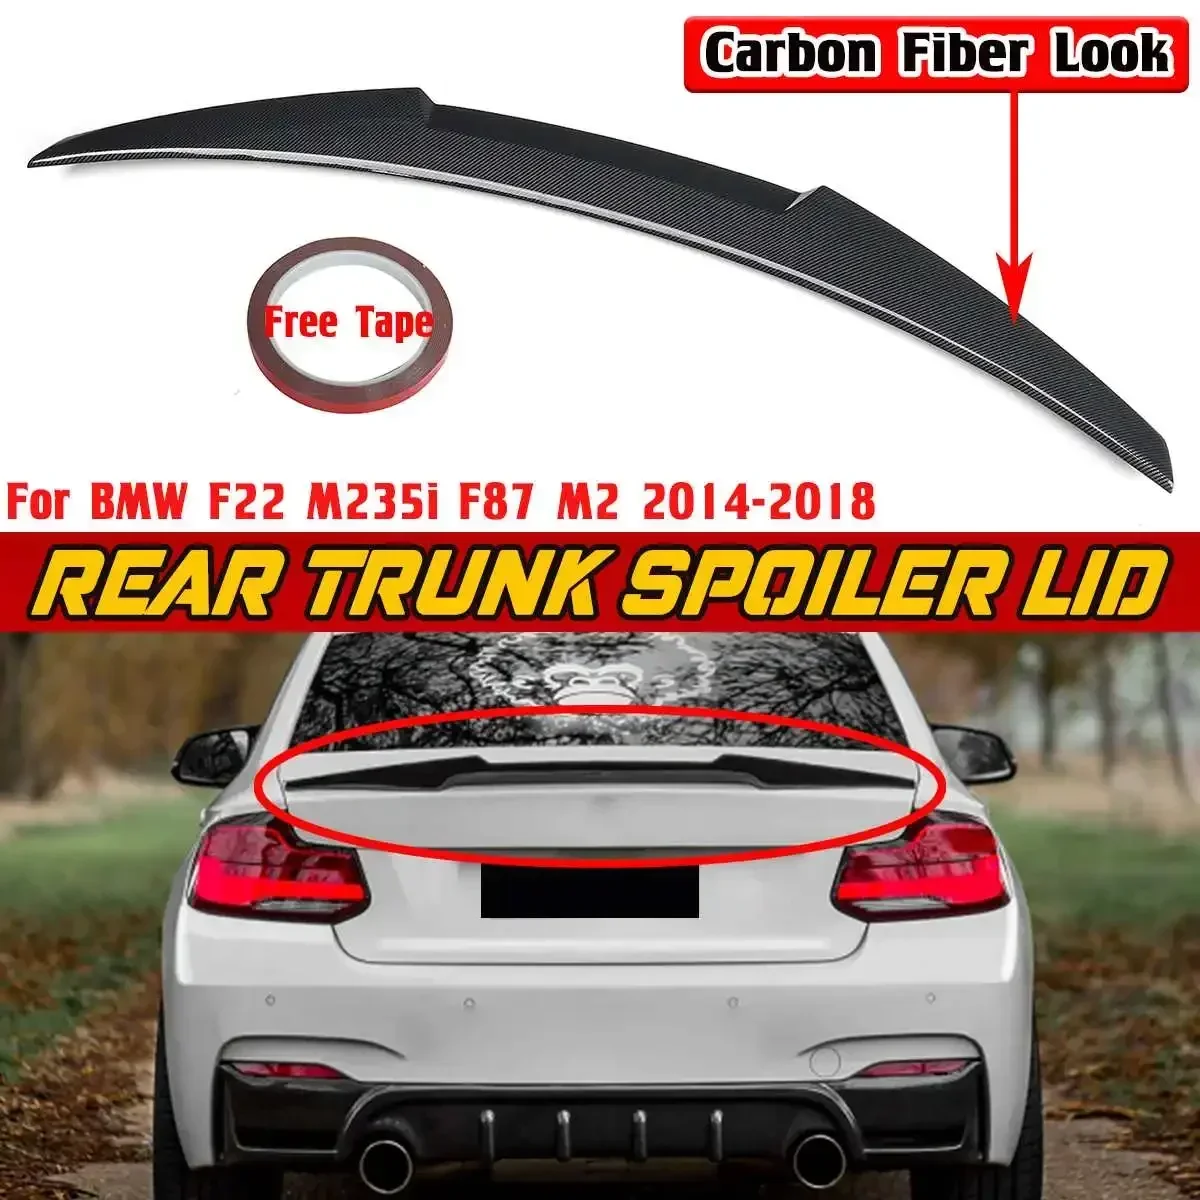 

F22 M4 Style Car Rear Trunk Spoiler Lip Boot Wing Lip For BMW F22 M235i F87 M2 2014-2018 Car Rear Roof Lip Spoiler Exterior Part